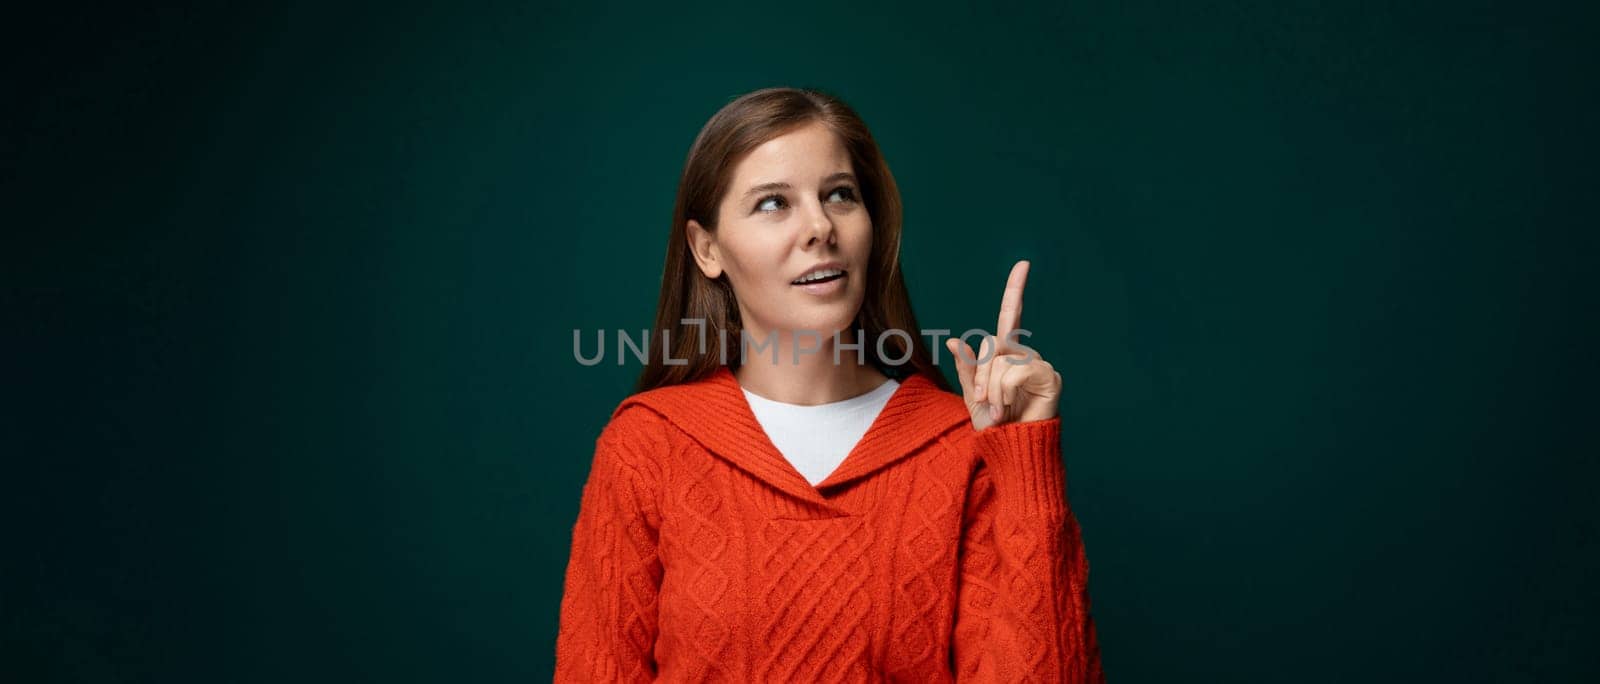 Portrait of a smart young woman in a red sweater who is thinking about something and looking up.